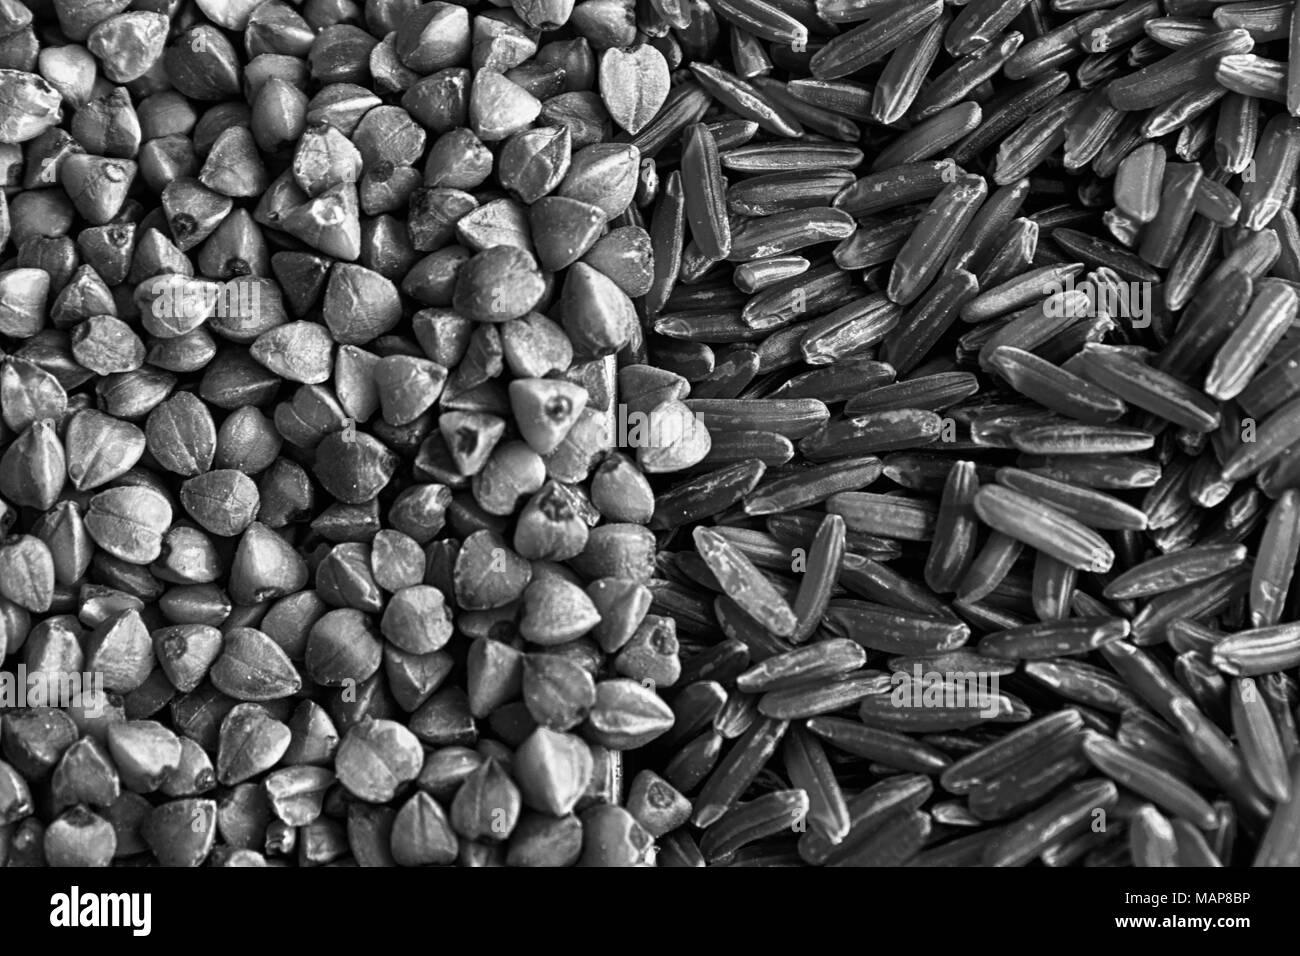 Monochrome Rice and buckwheat grain texture, background for web site or mobile devices. Stock Photo